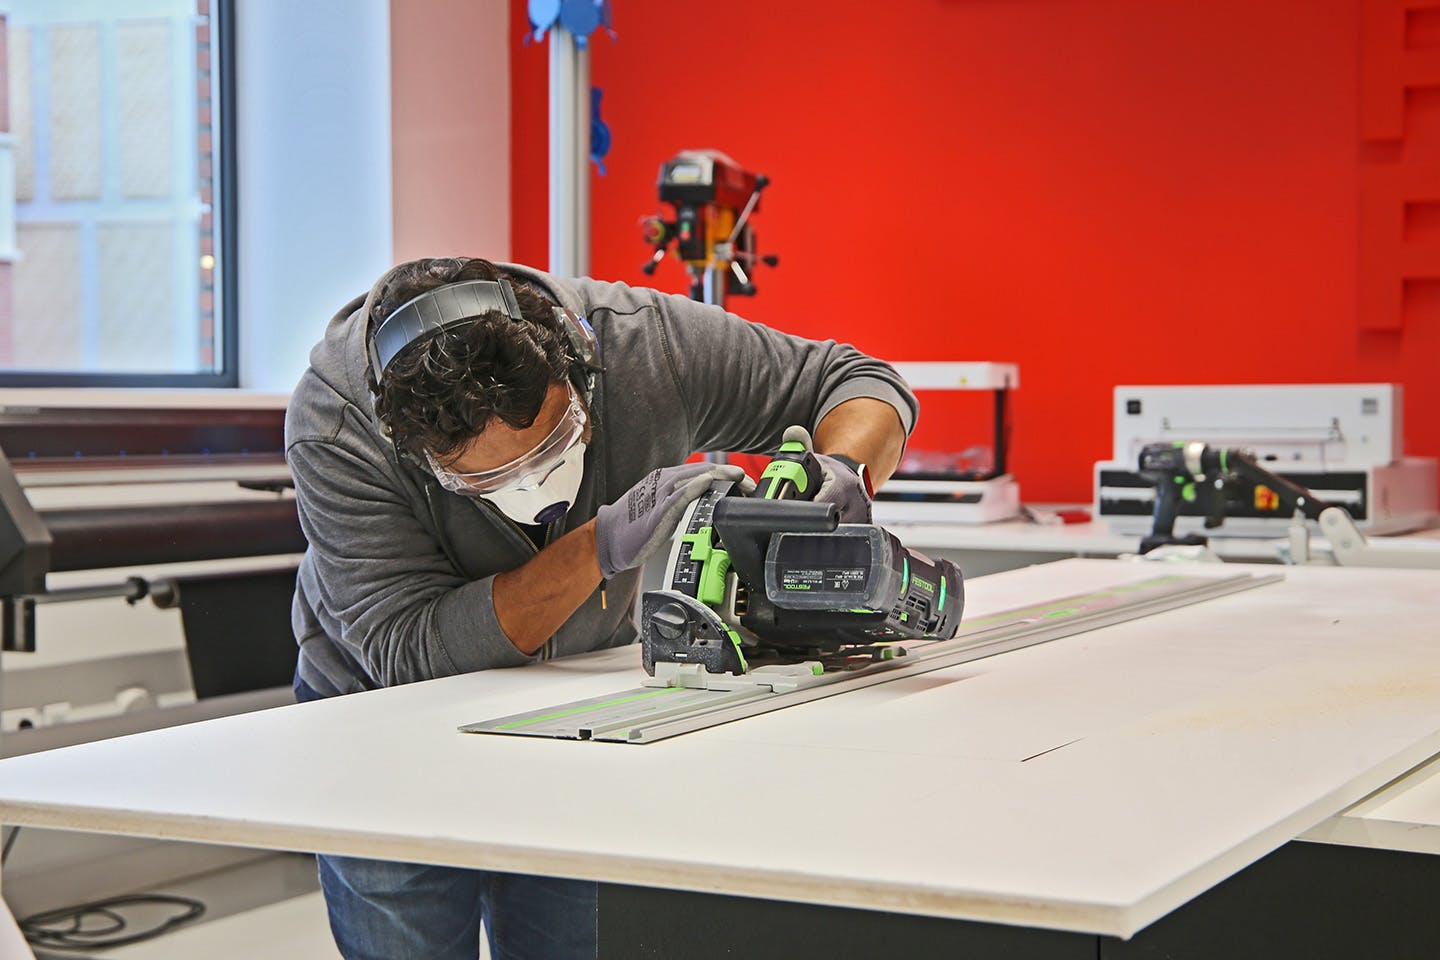 Student using a circular saw at the Parsons Paris Romainville campus making space.